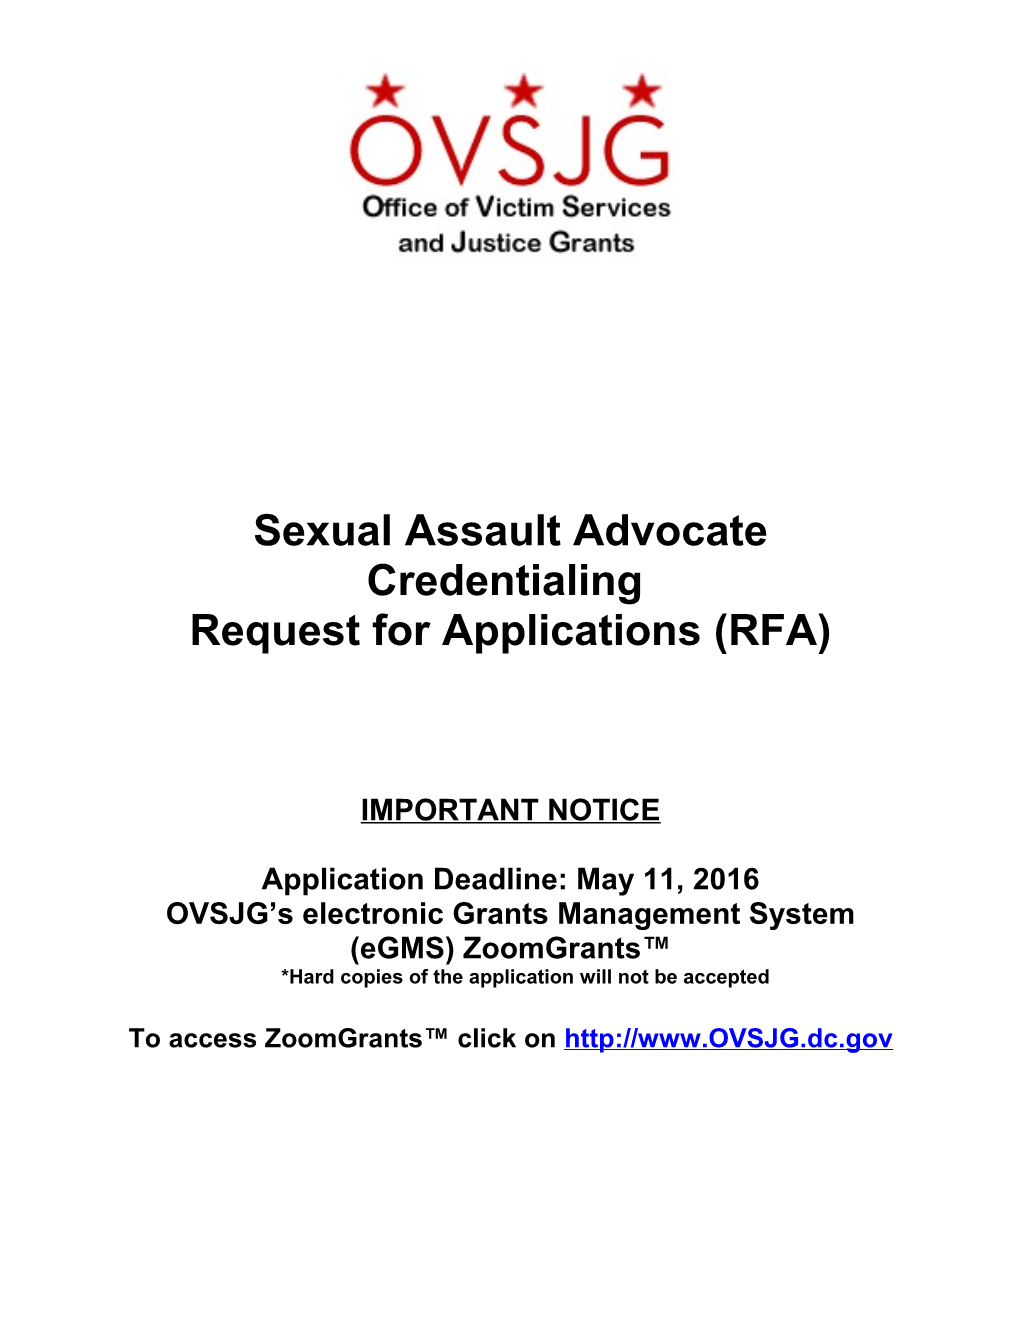 Request for Applications (RFA) s1